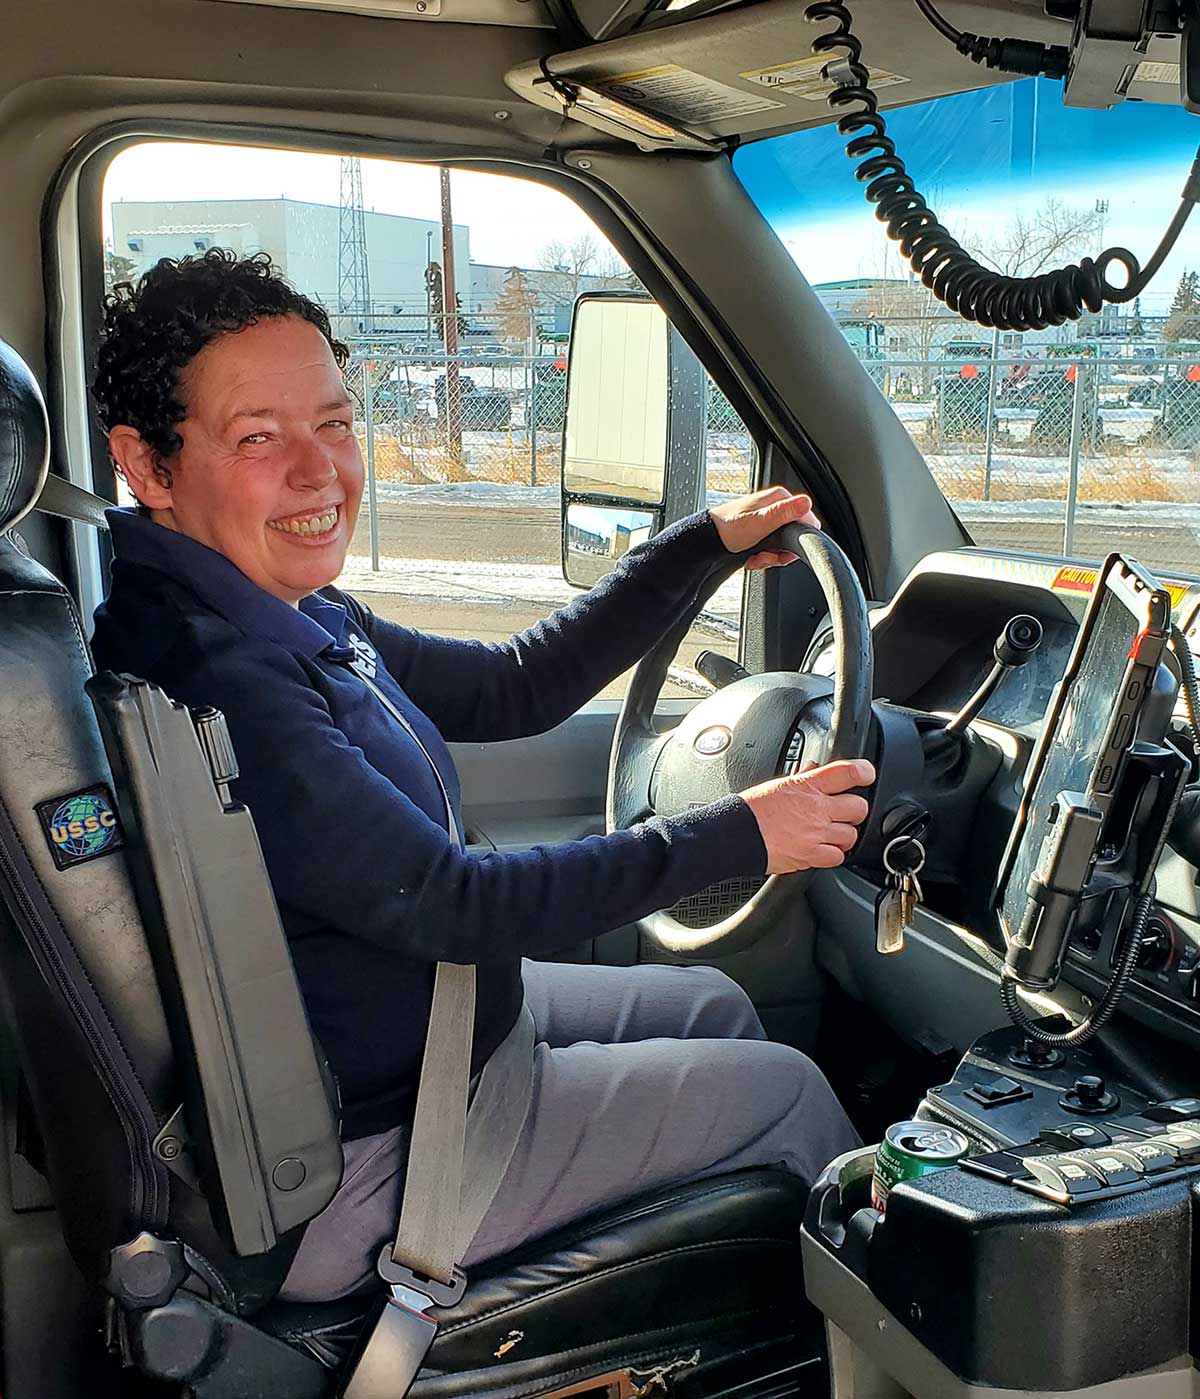 Michelle gleefully in the drivers seat of a DATS vehicle